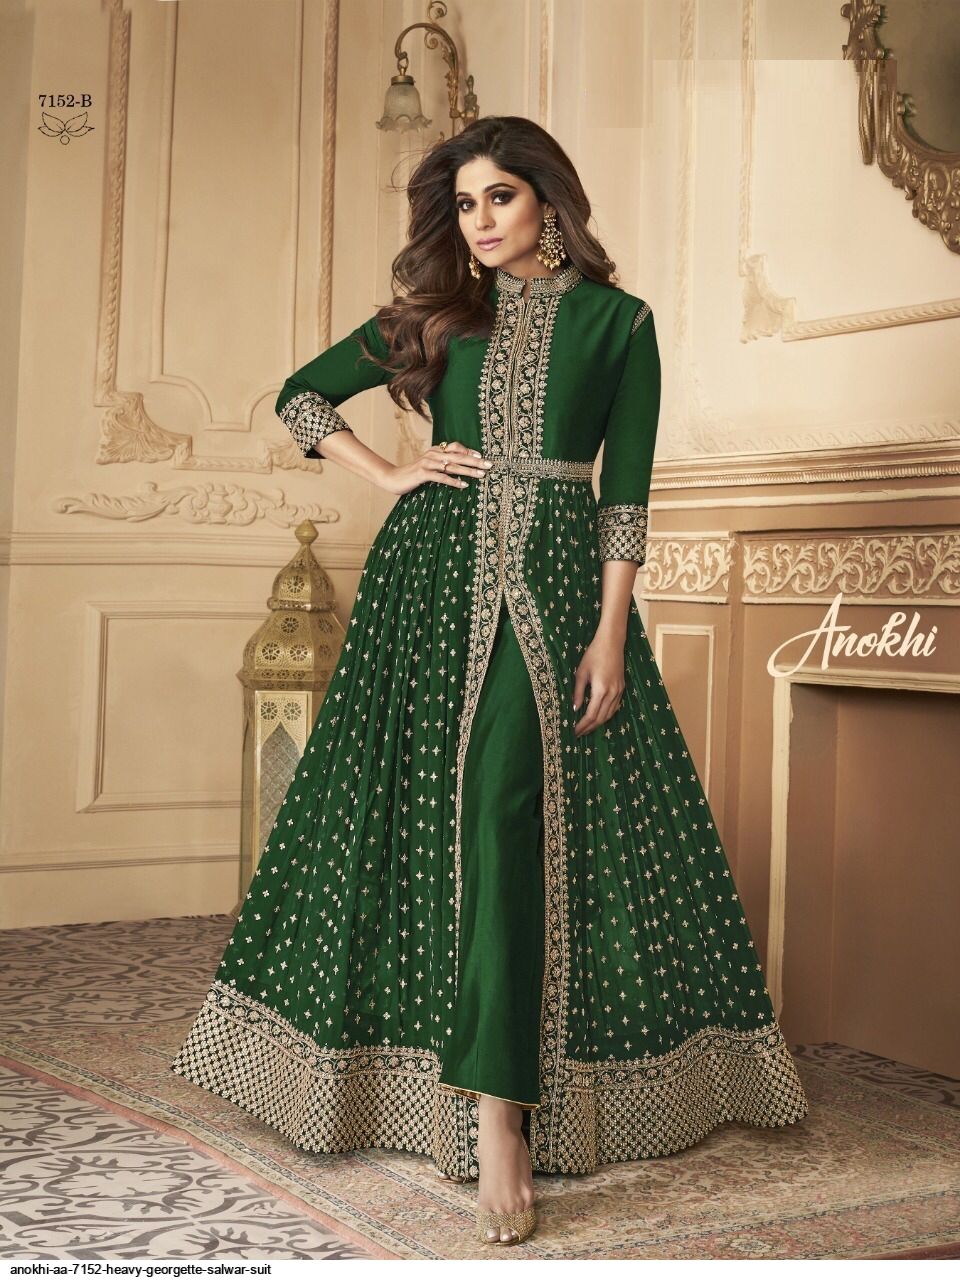 Anokhi | Indian fashion, Modest outfits, Simple kurti designs